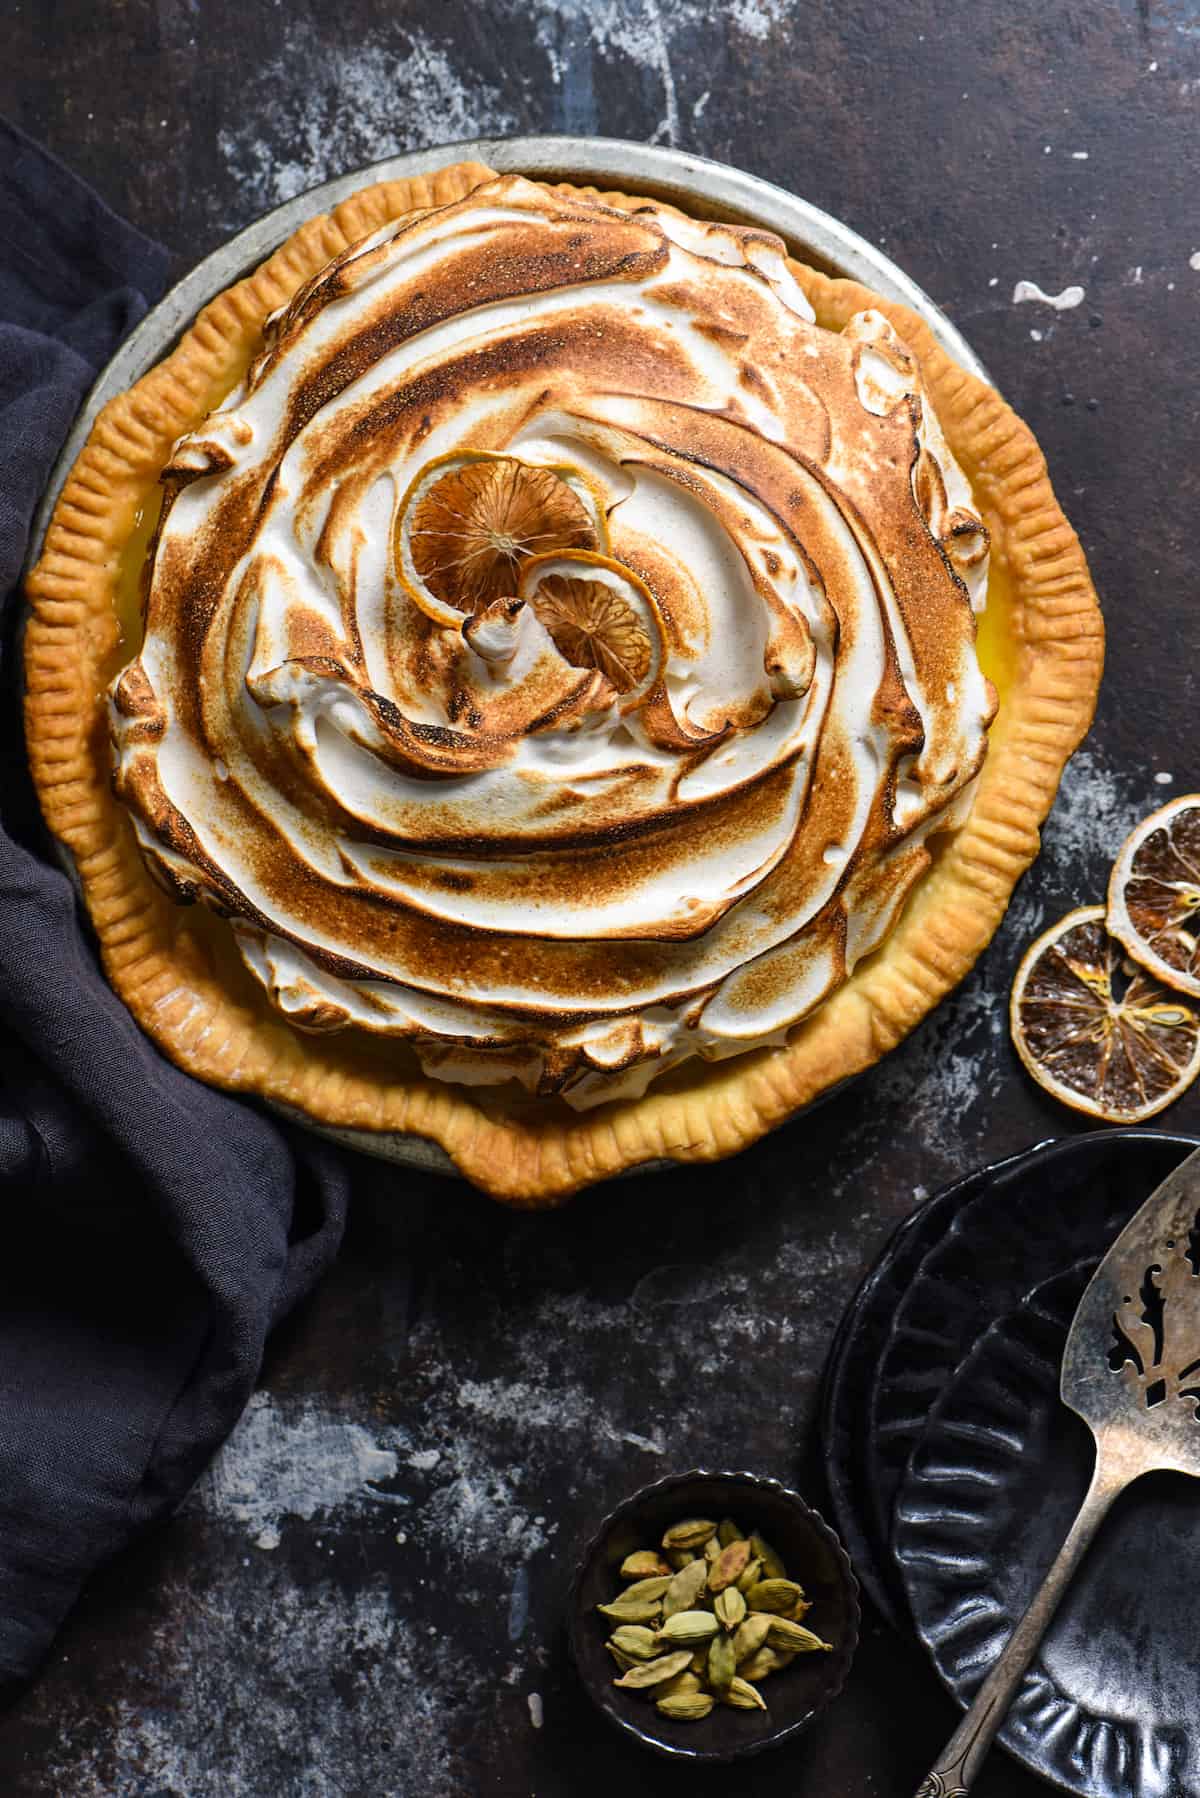 Lemon Cardamom Meringue Pie - Put an easy gourmet twist on a classic pie by adding a touch of cardamom to the meringue! | foxeslovelemons.com